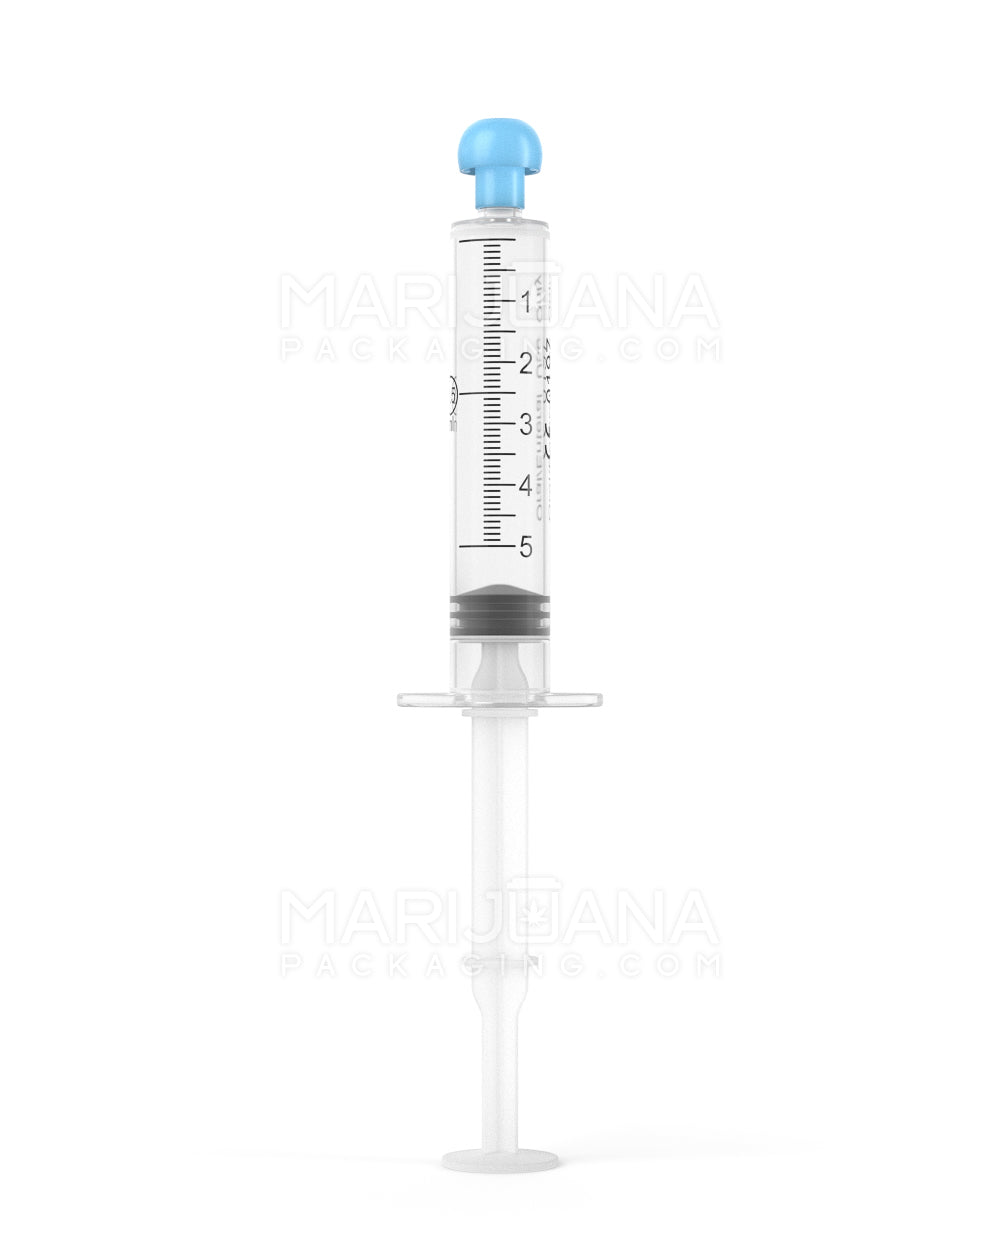 Plastic Oral Concentrate Syringes | 5mL - 1mL Increments | Sample - 1